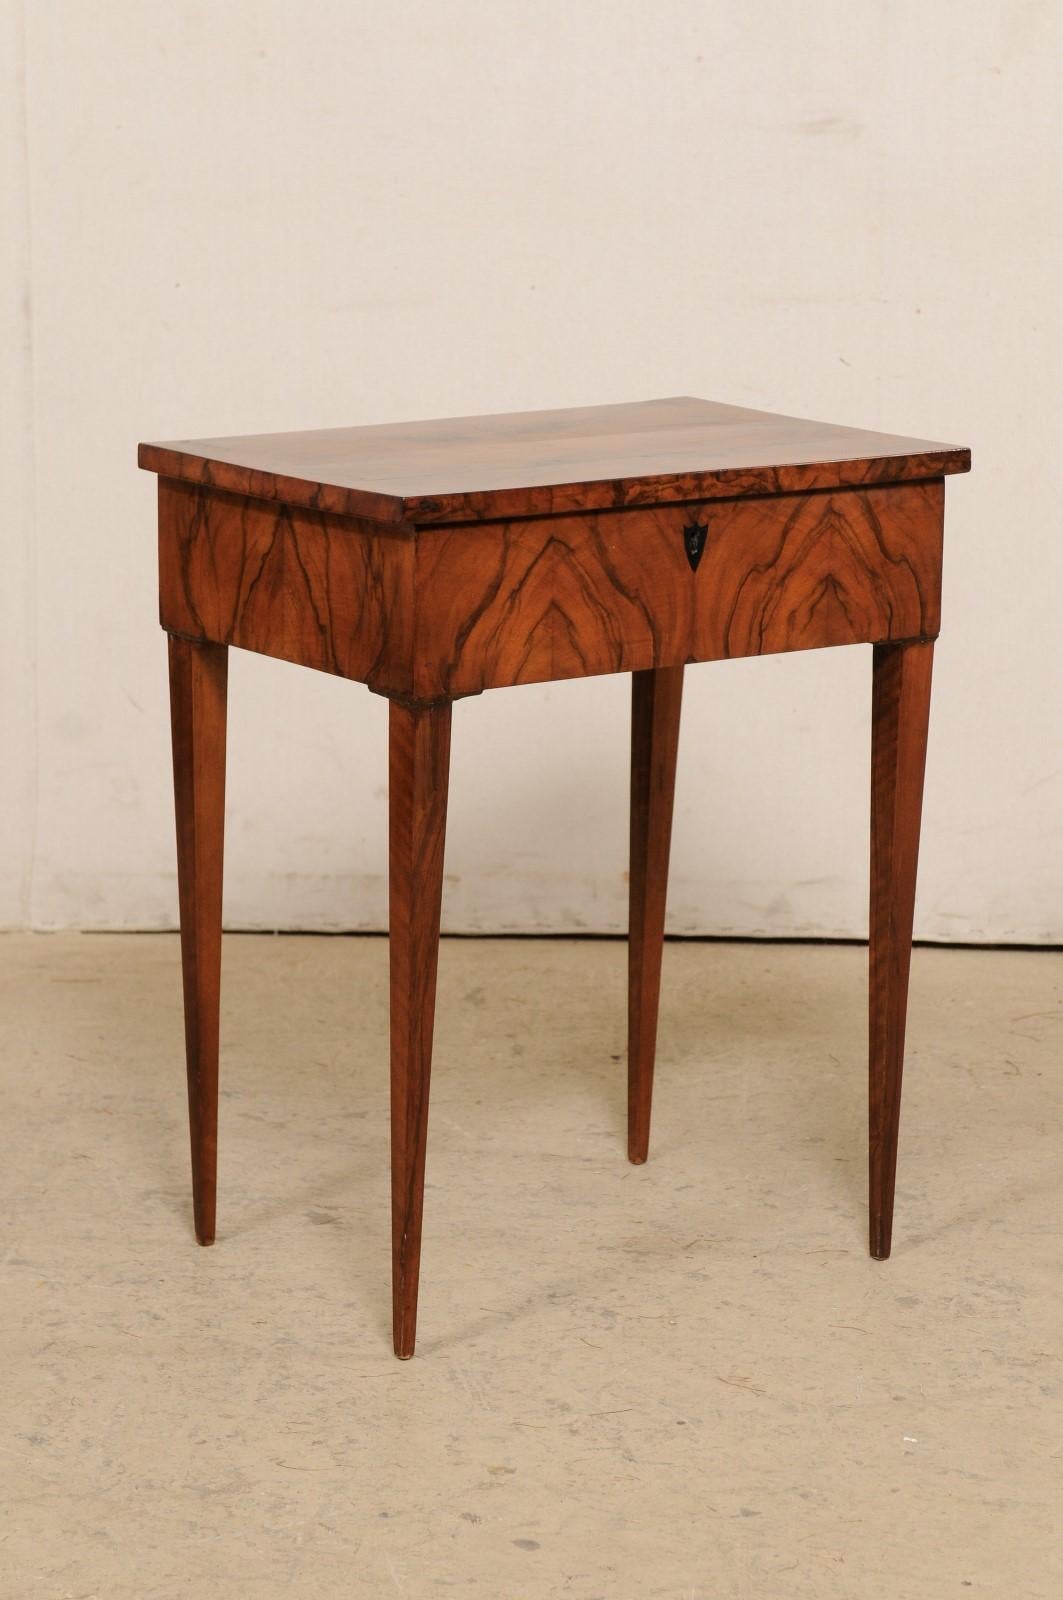 An Italian end table with book-matching walnut veneer from the late 19th to early 20th century. This antique side table from Italy features a beautiful book-match veneer on it's top and apron. The piece is otherwise minimally adorn, allowing the